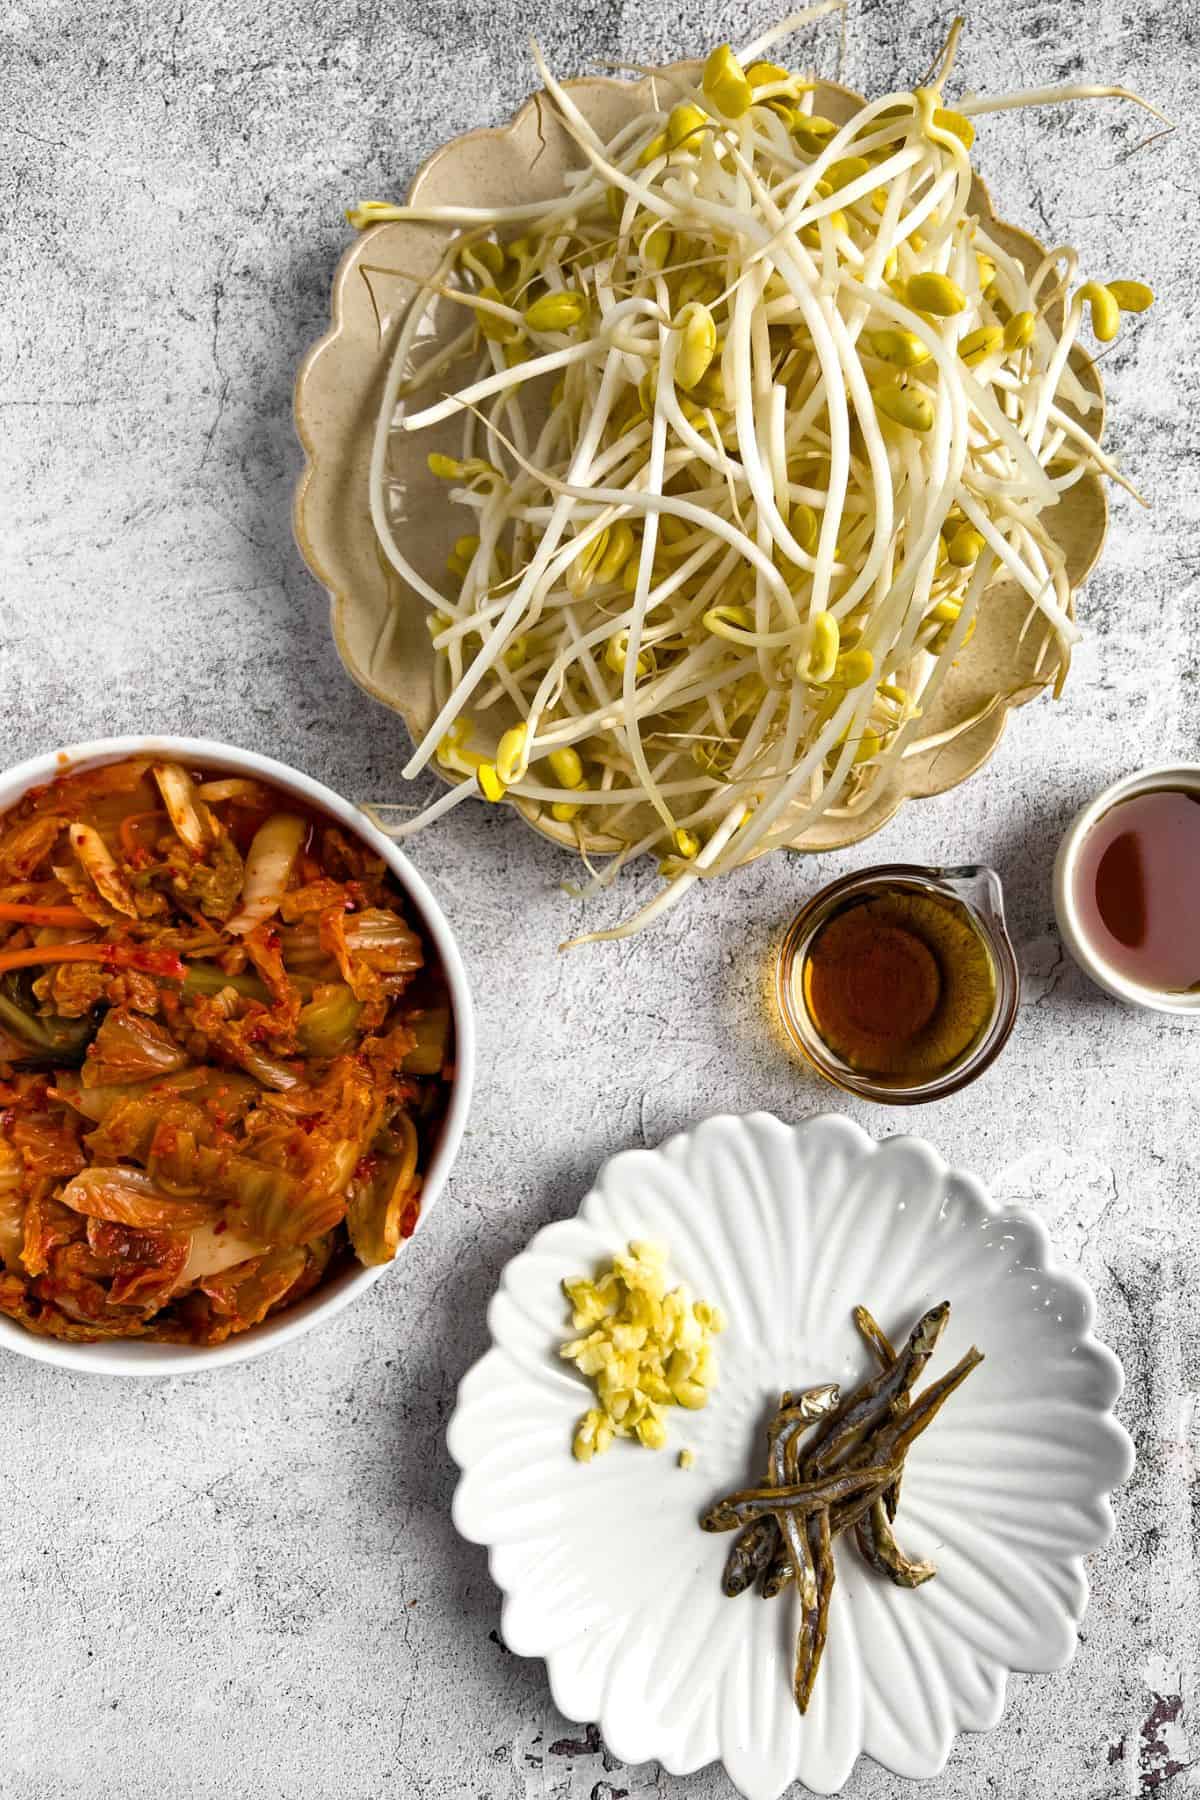 Ingredients for korean soybean sprout kimchi soup.